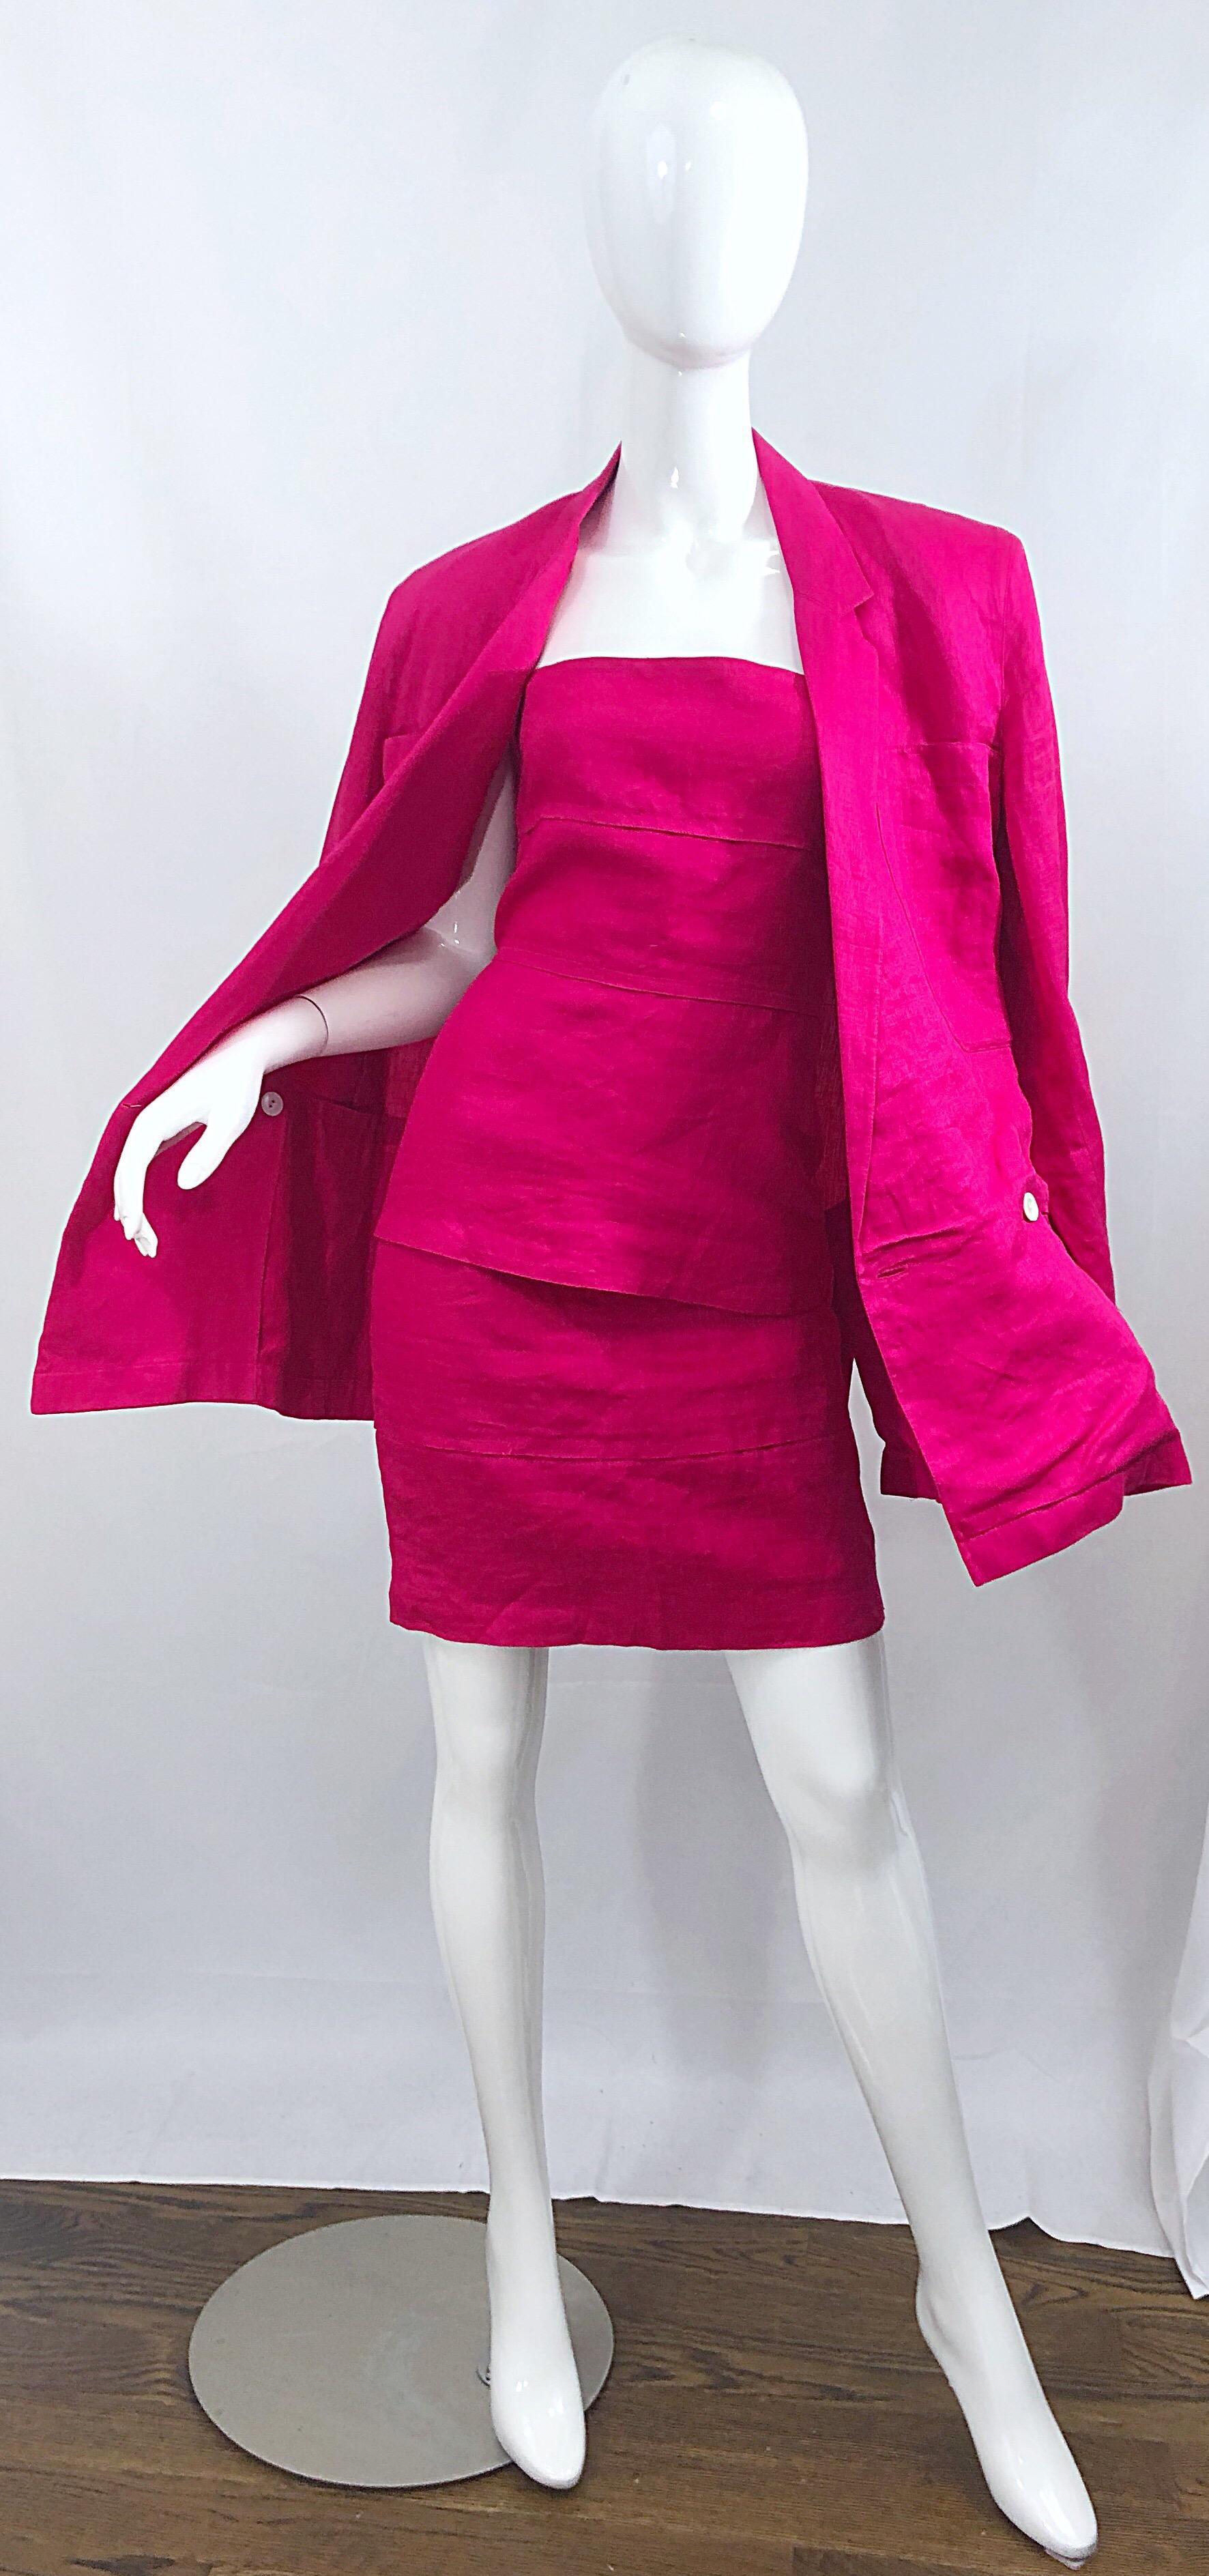 Shocking hot pink vintage late 80s GIANNI VERSACE for GENNY strapless linen dress and matching blazer jacket! Tailored strapless dress features flattering panels. Hidden zipper up the back with hook-and-eye closure. Oversized double breast blazer